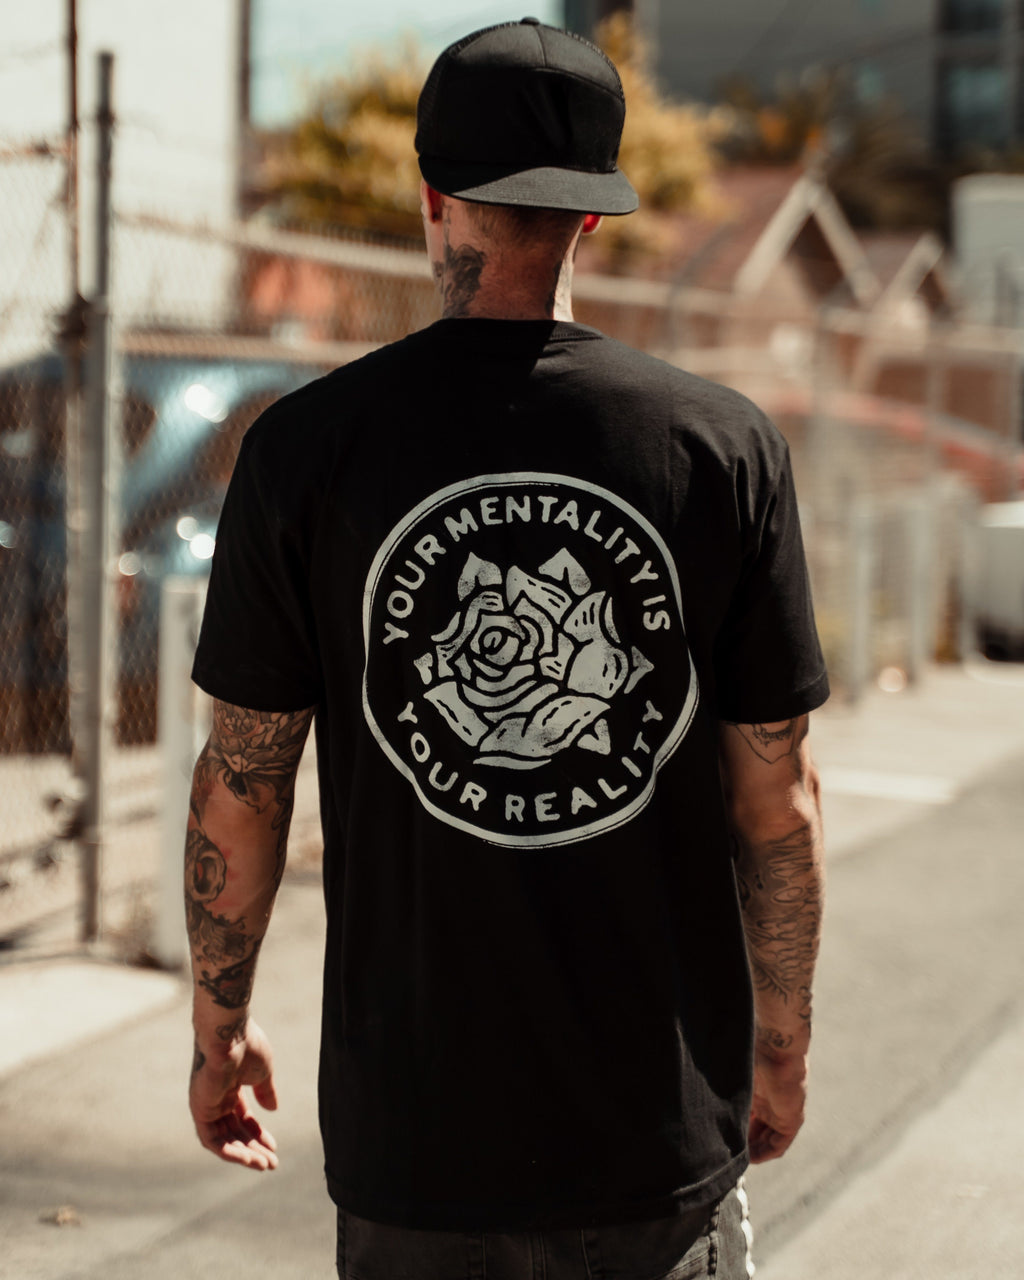 V.4 Mentality Tee – In God We Must